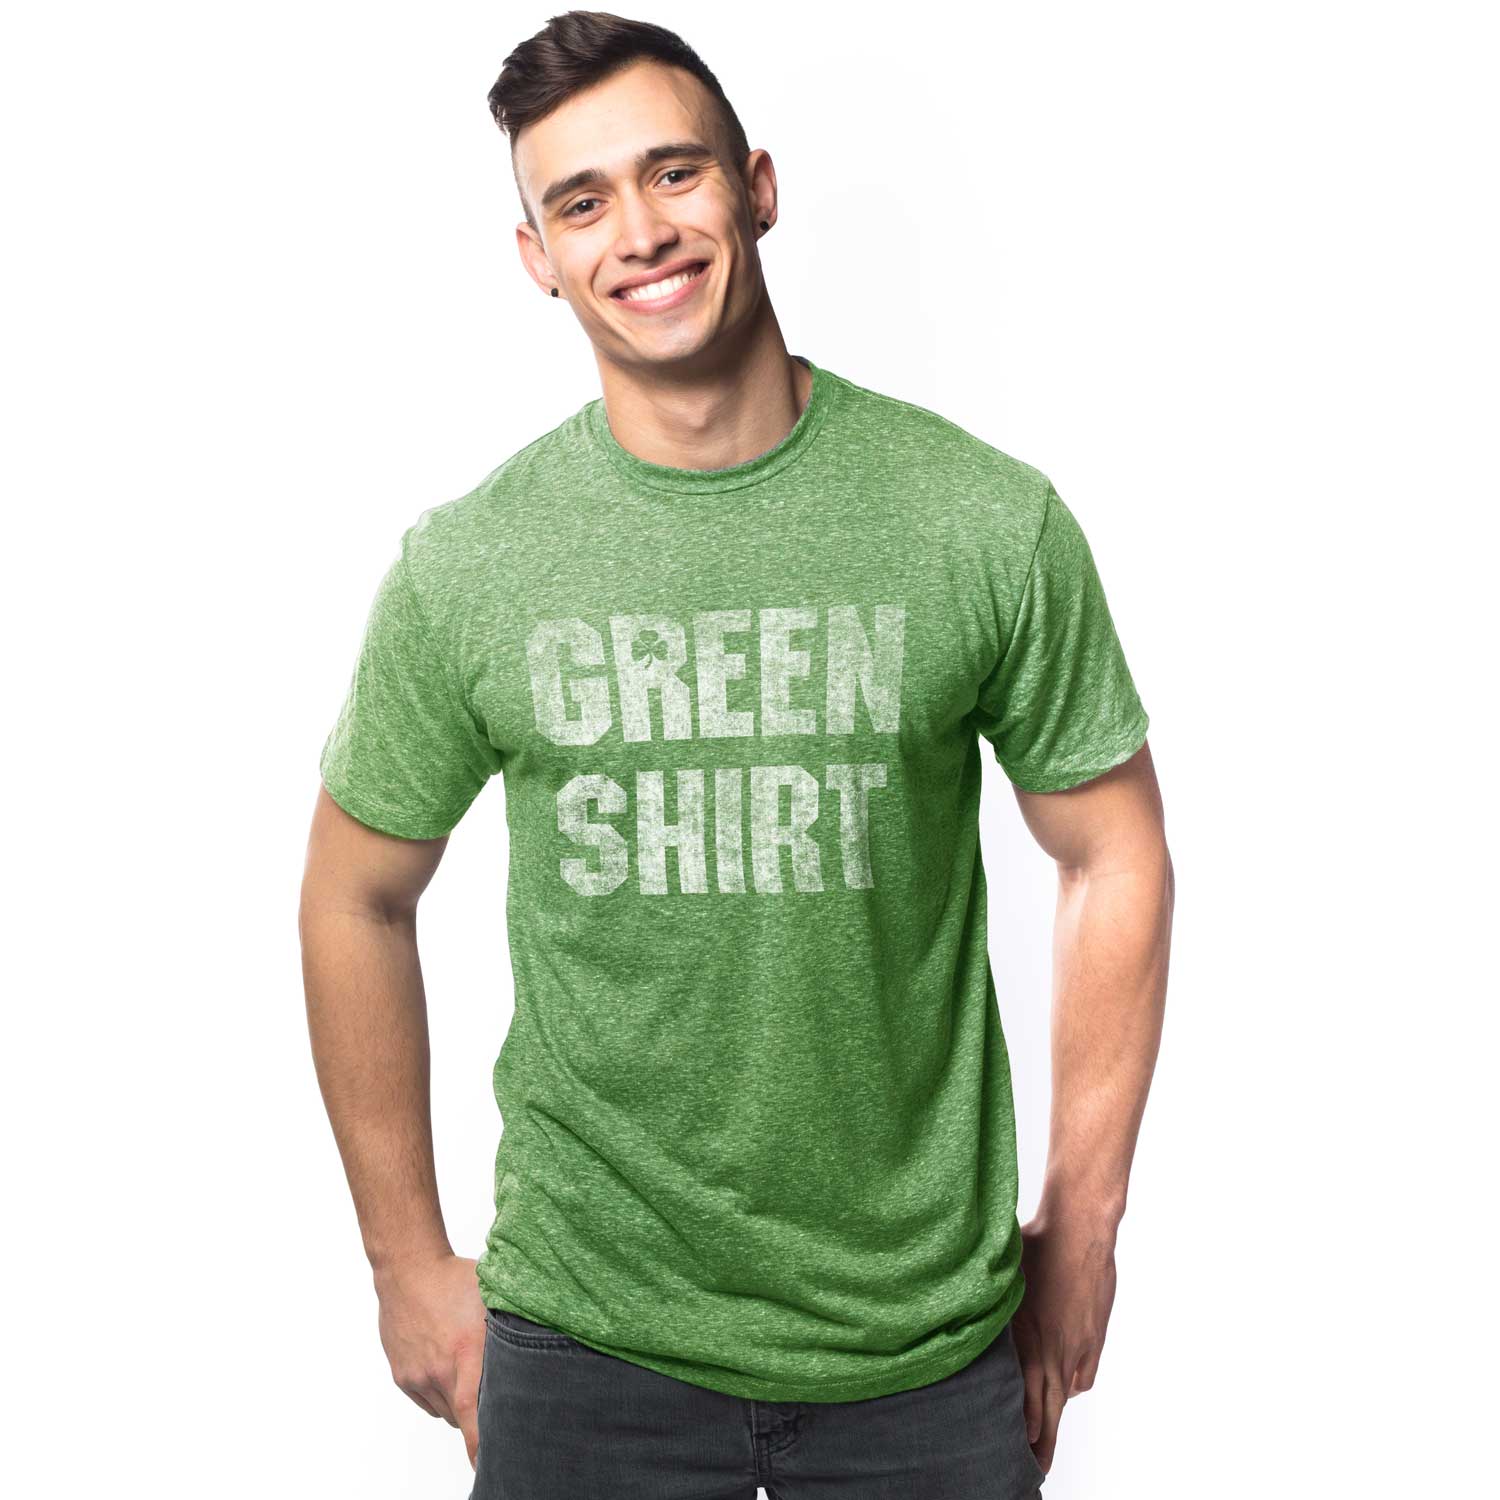 Men's Green Shirt Cool Graphic T-Shirt | Vintage St Paddys Day Tee on Model | Solid Threads